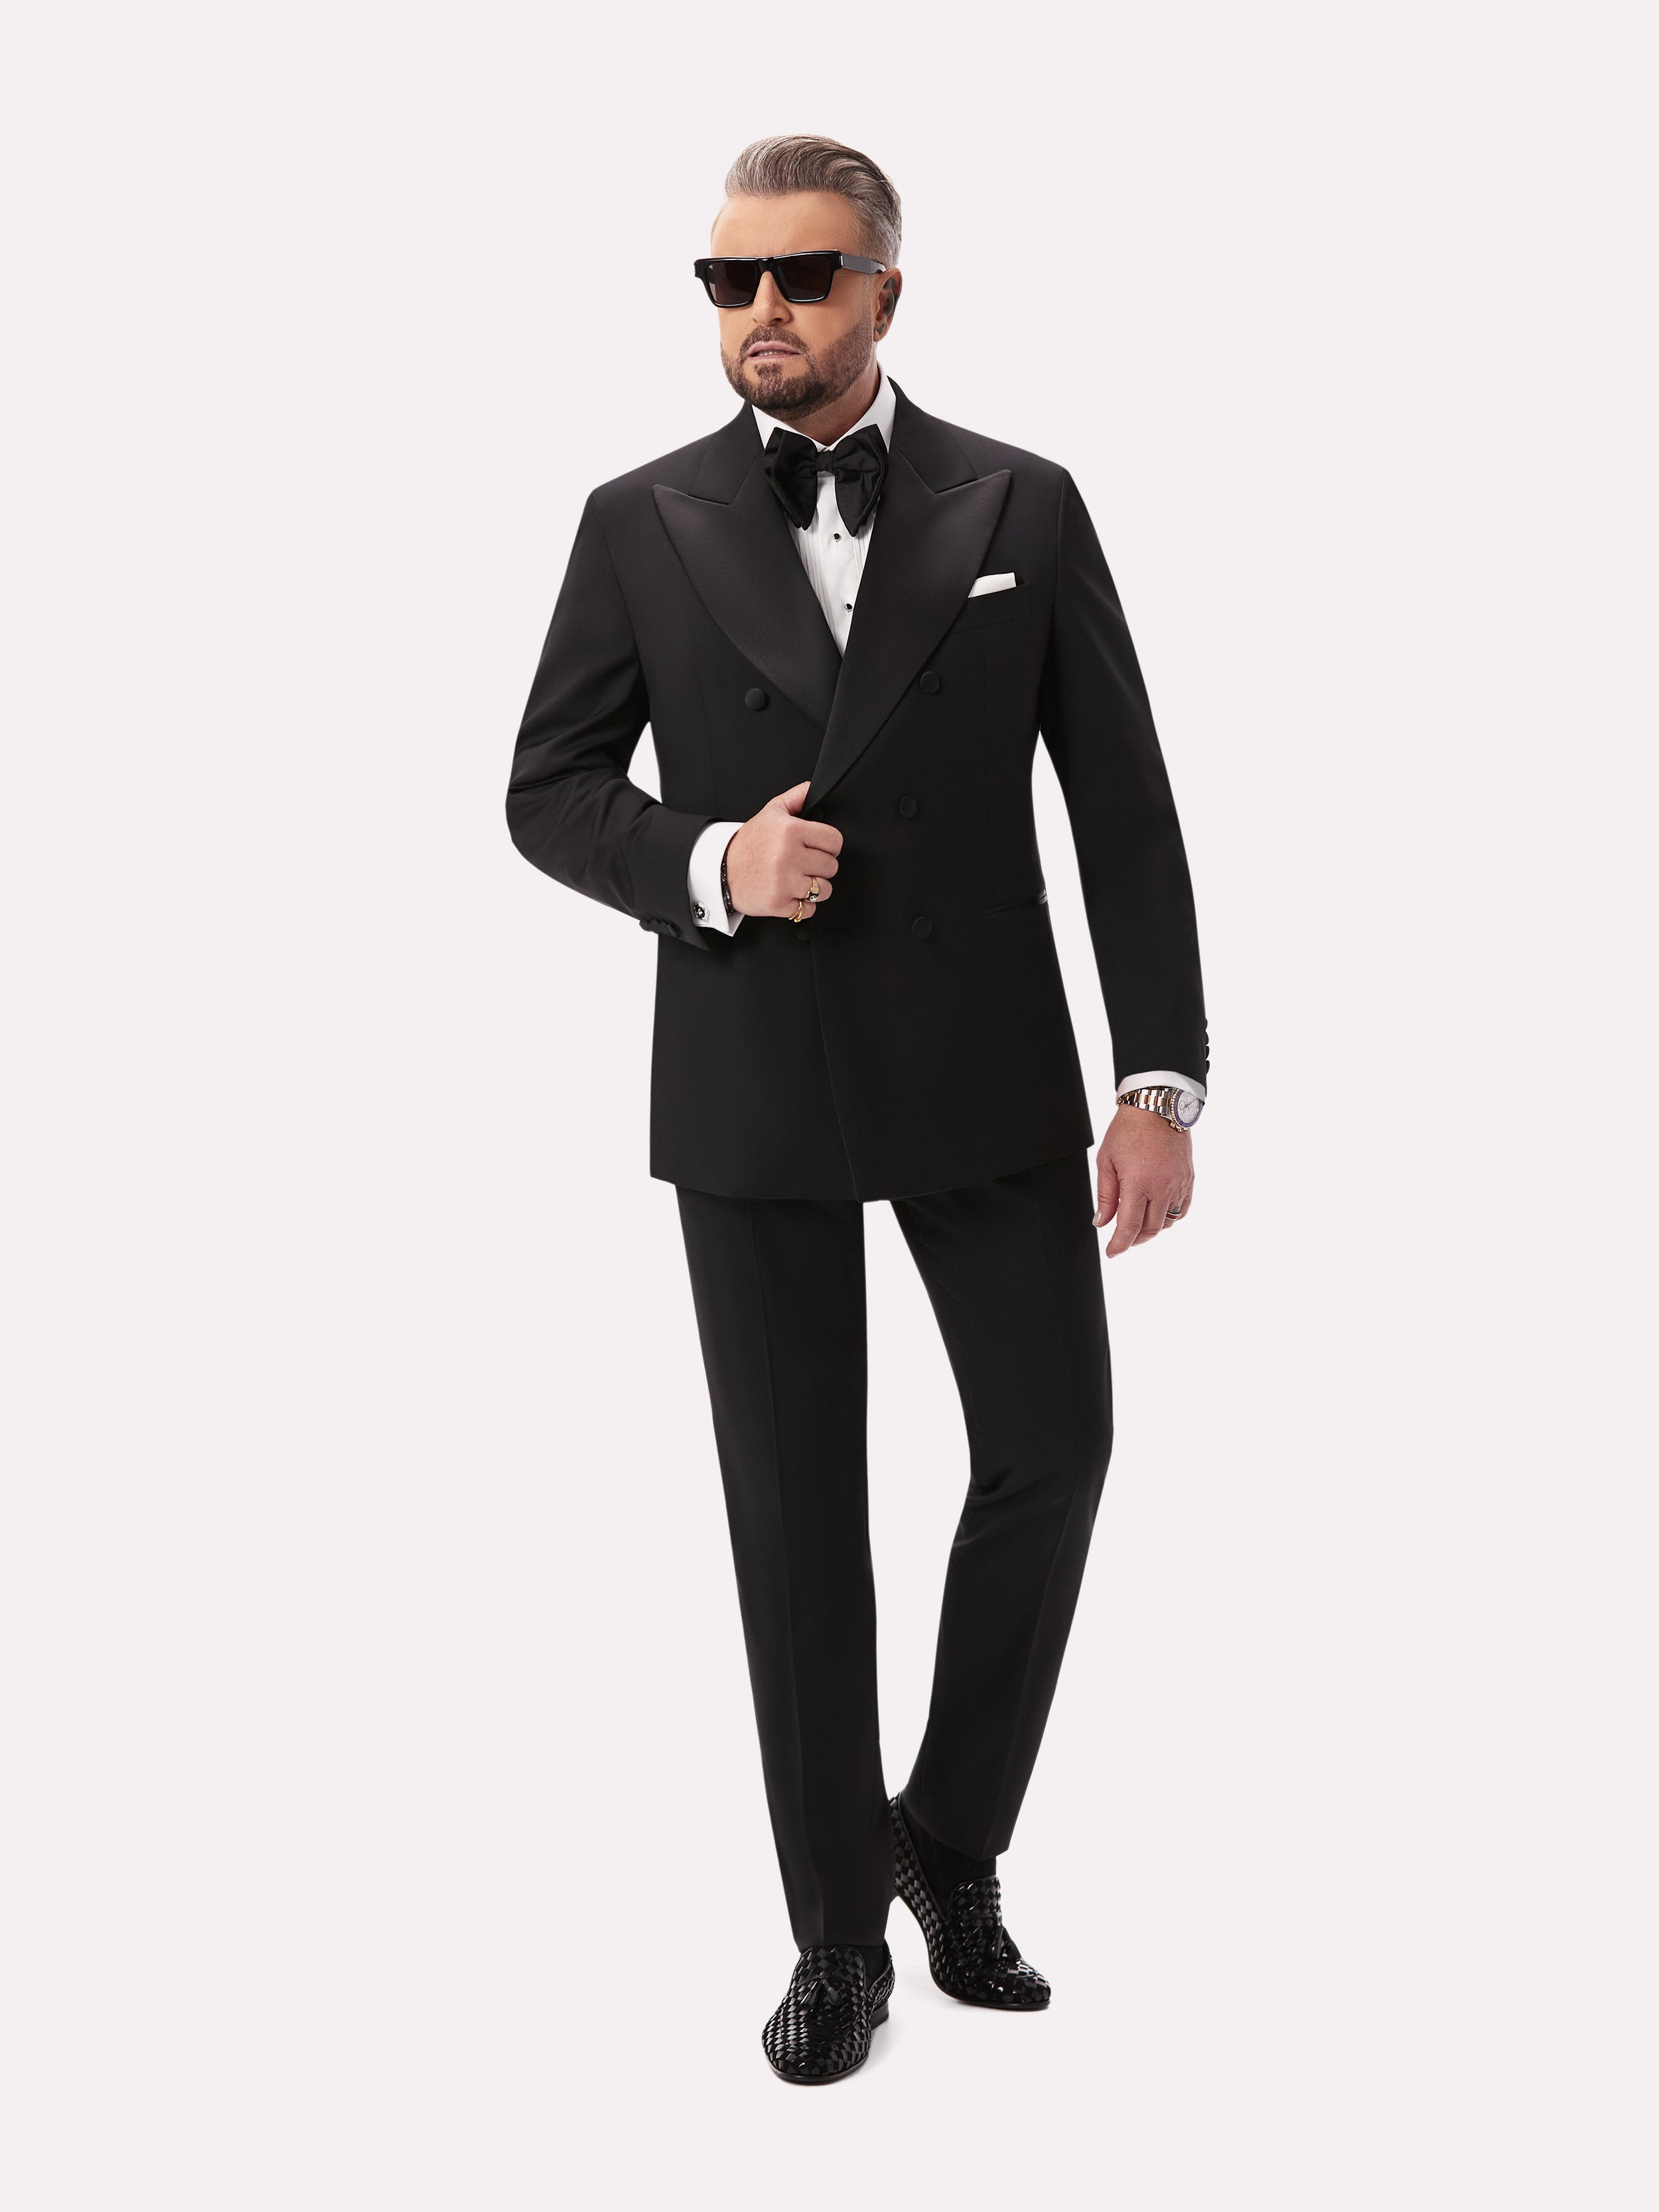 Black tuxedo jacket with two rows of buttons